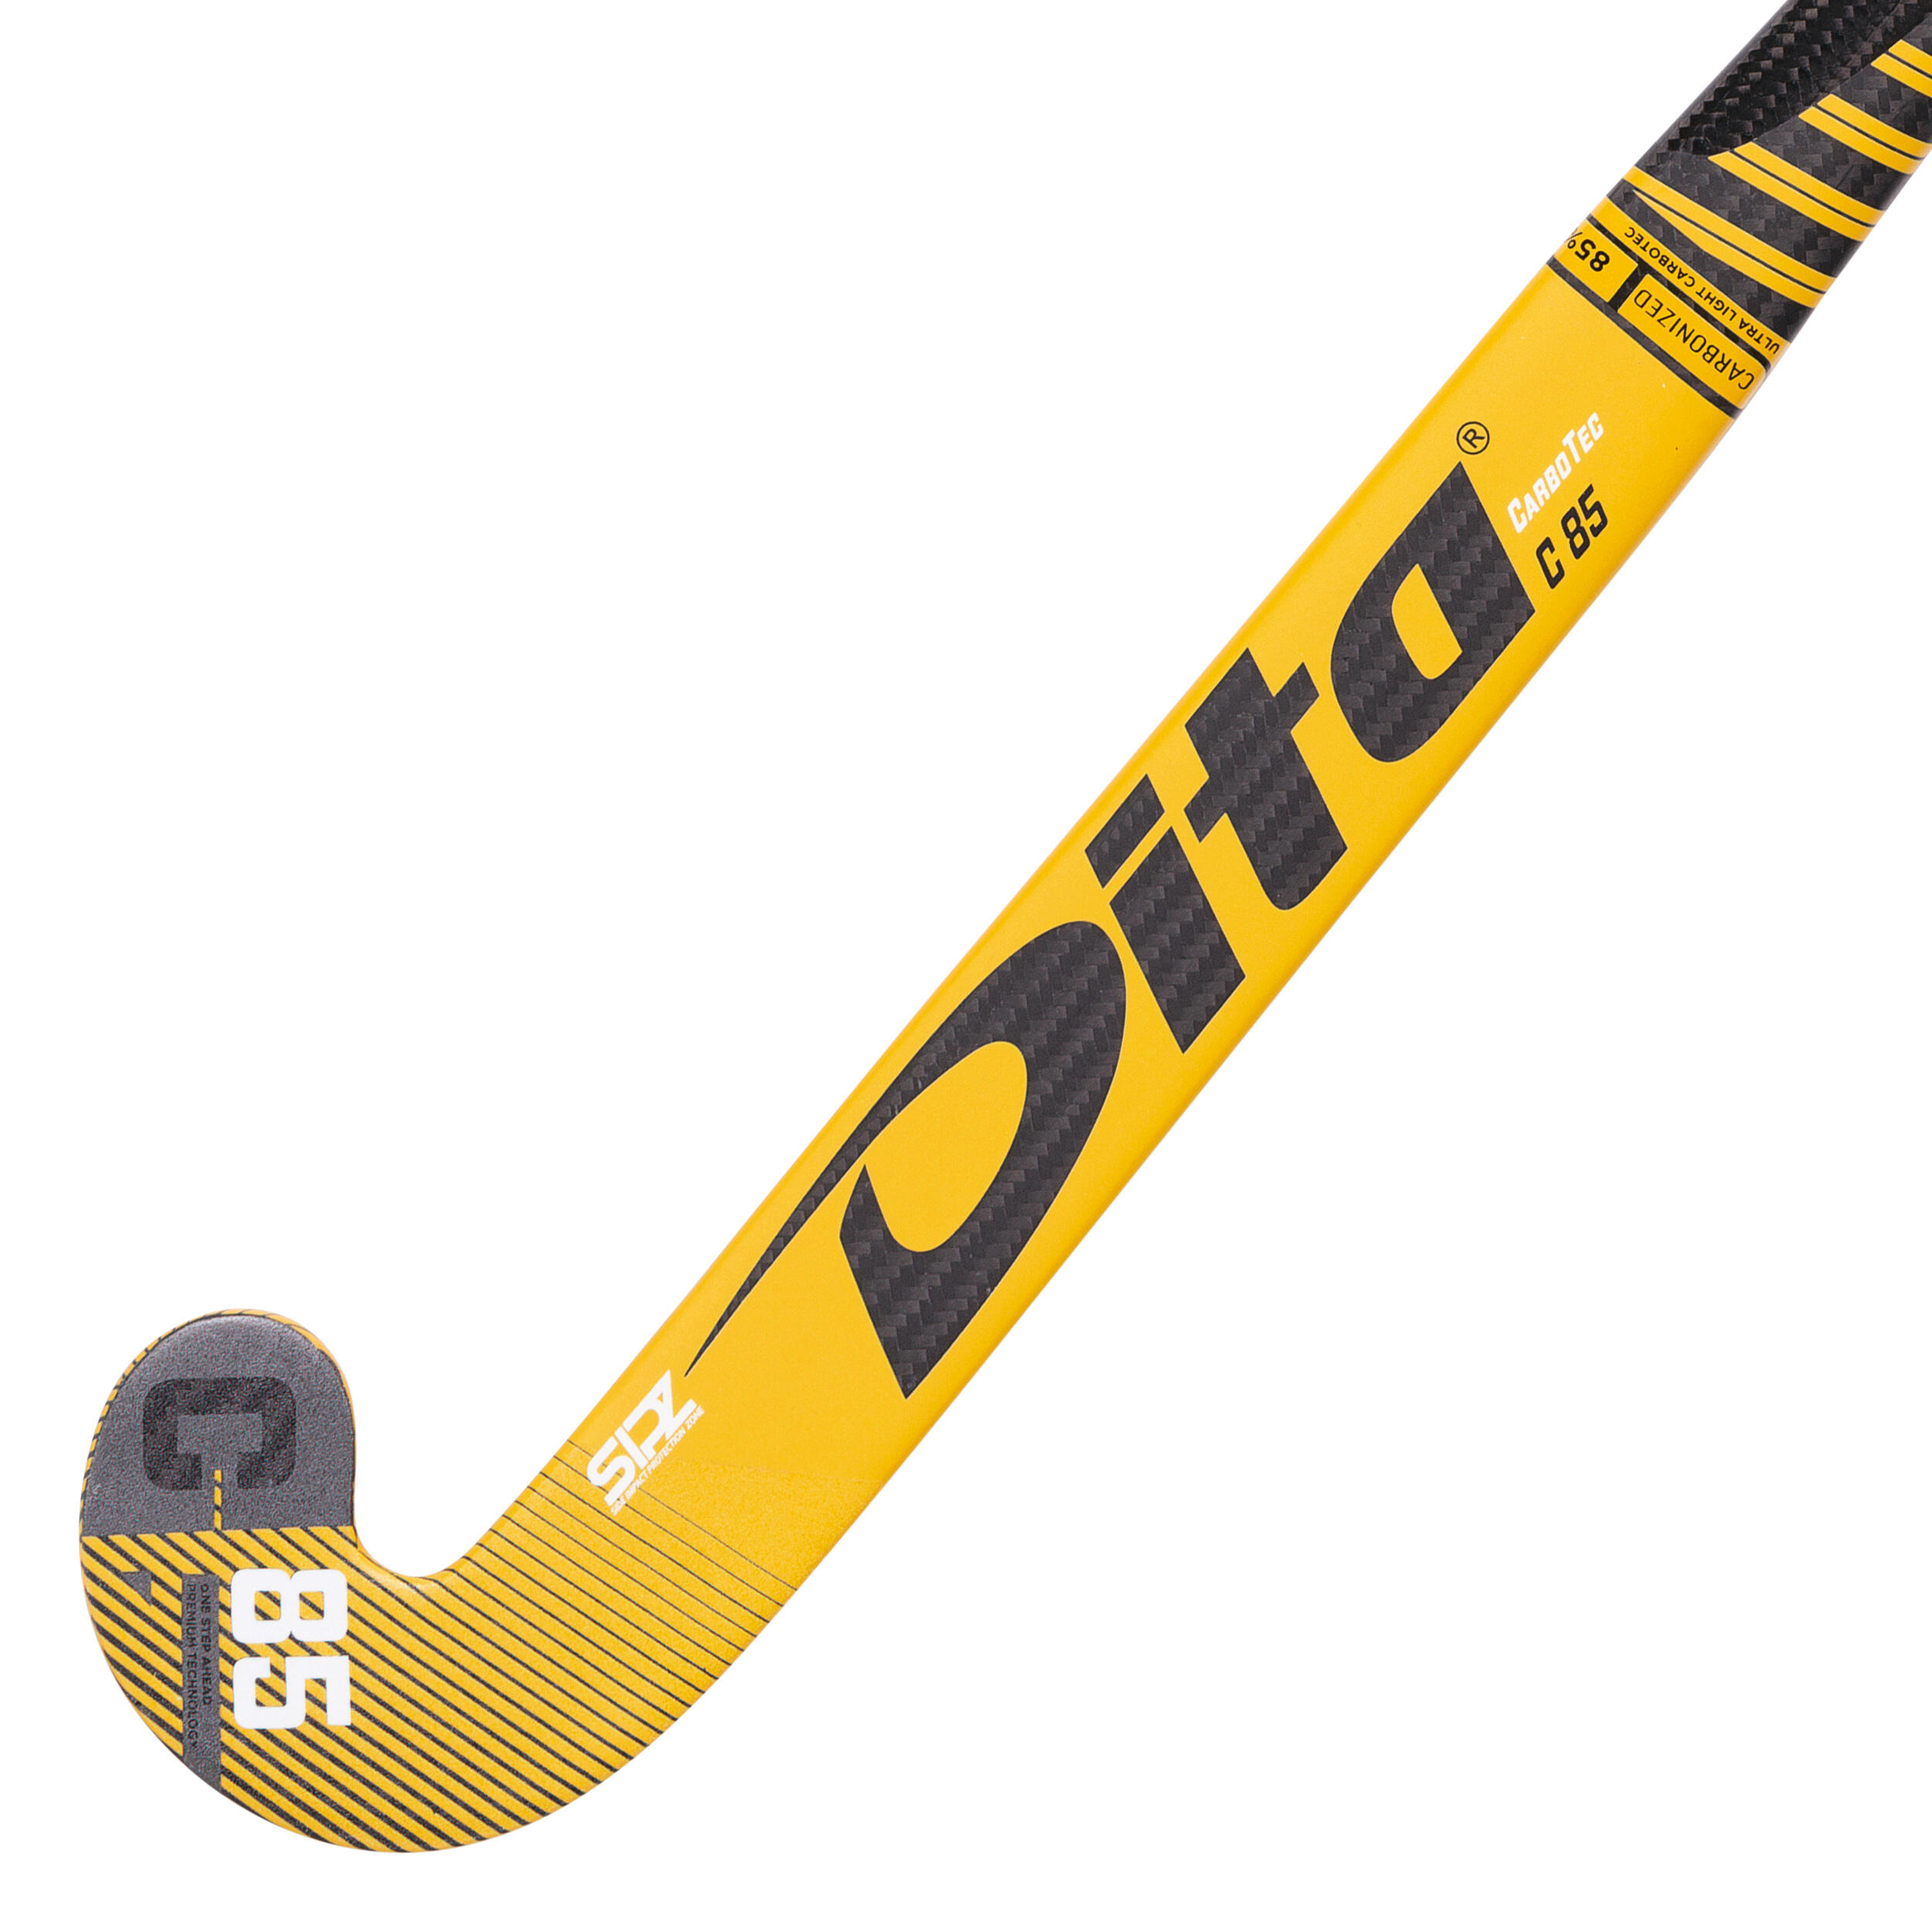 Adult Advanced 85% Carbon X Low Bow Field Hockey Stick carbotecC85 - Gold/Black 10/13